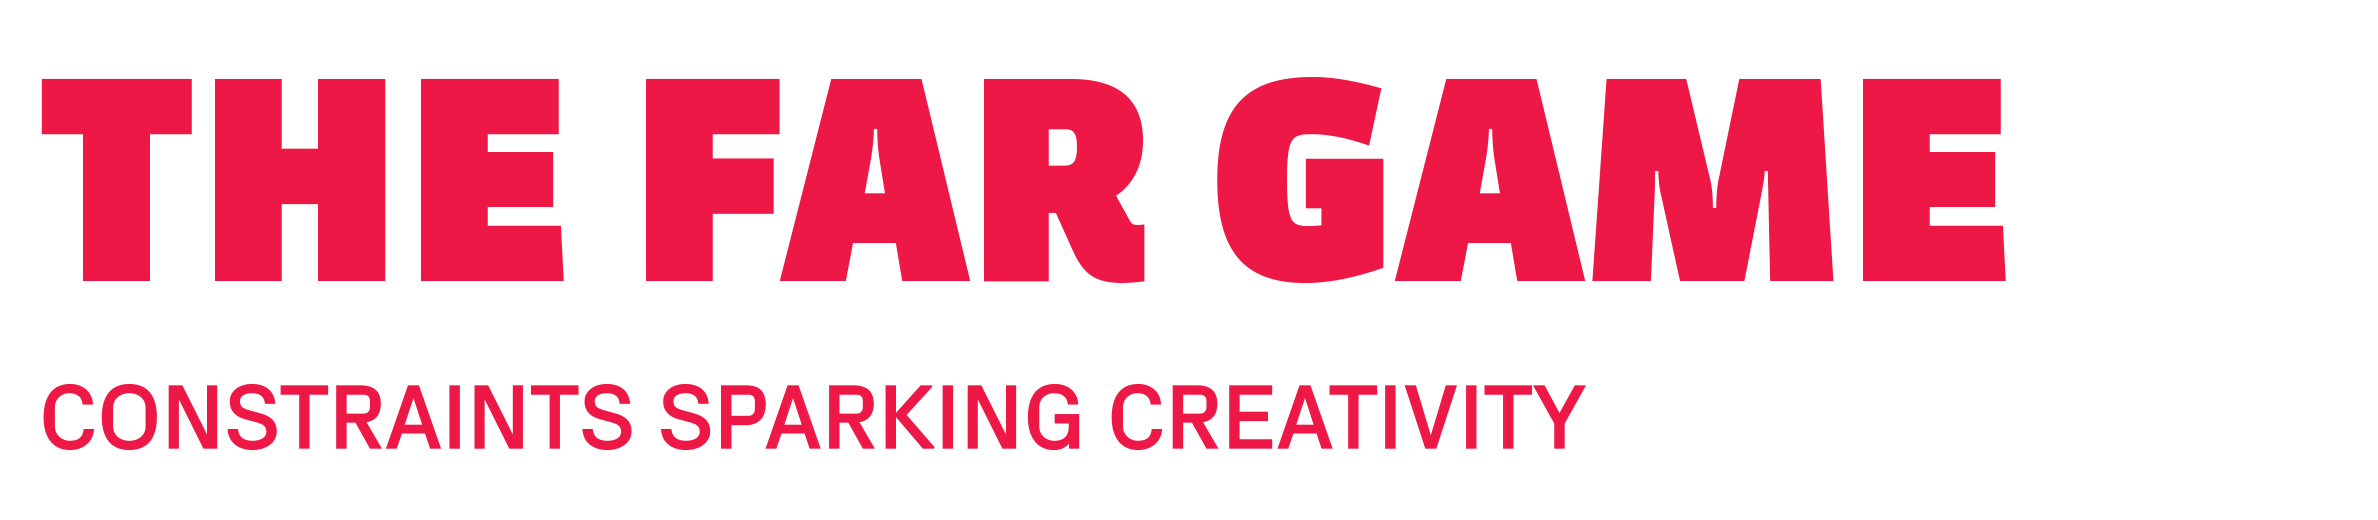 THE FAR GAME | CONSTRAINTS SPARKING CREATIVITY